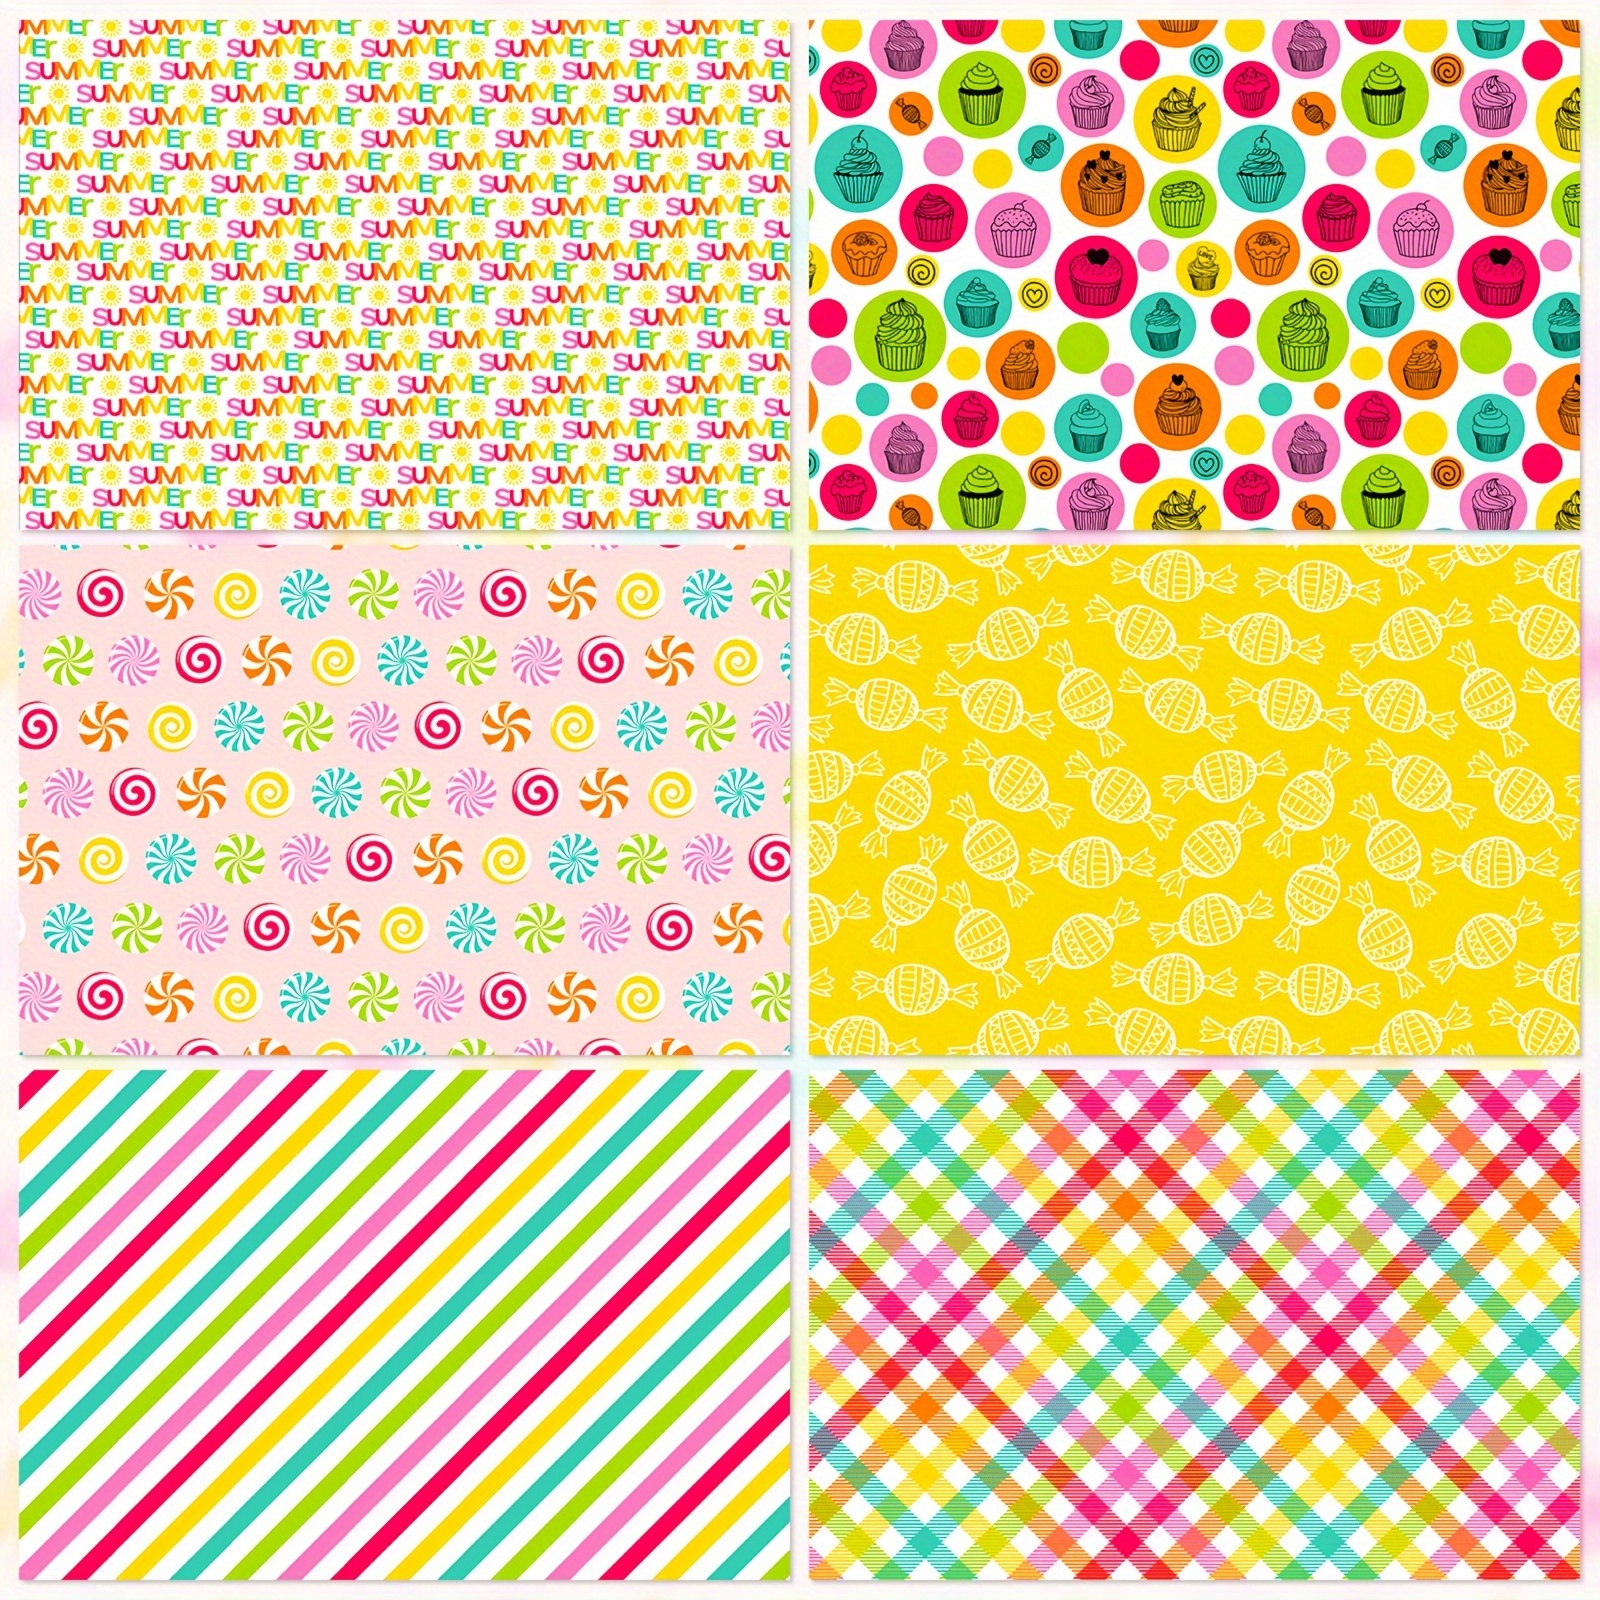 12 Sheets Rainbow Series Material Paper Pack, Beautiful Colored Paper  Cards, Scrapbook, Card Making, Background Paper